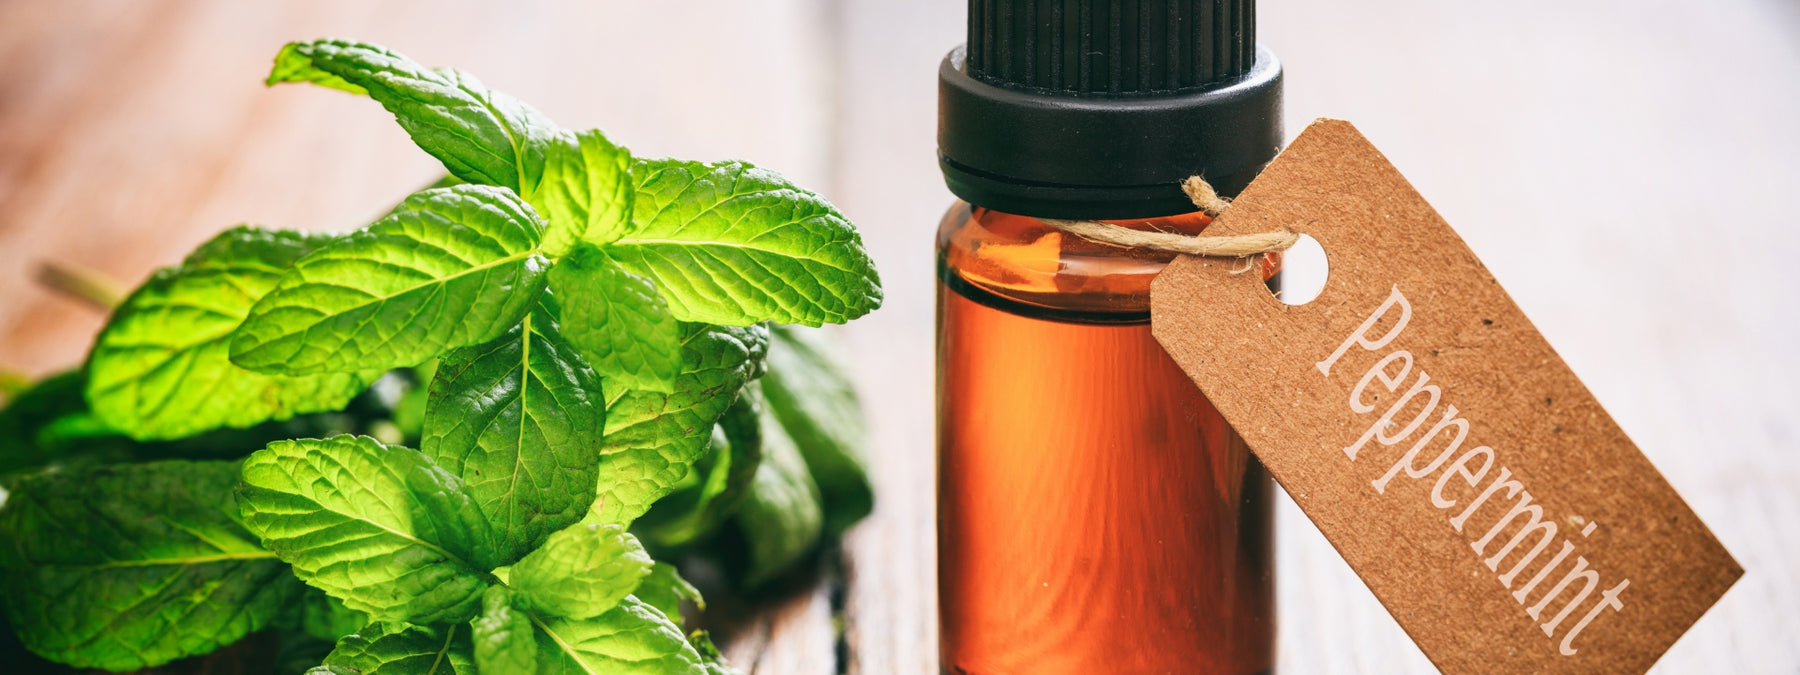 Peppermint Essential Oil - History, Uses, and Benefits